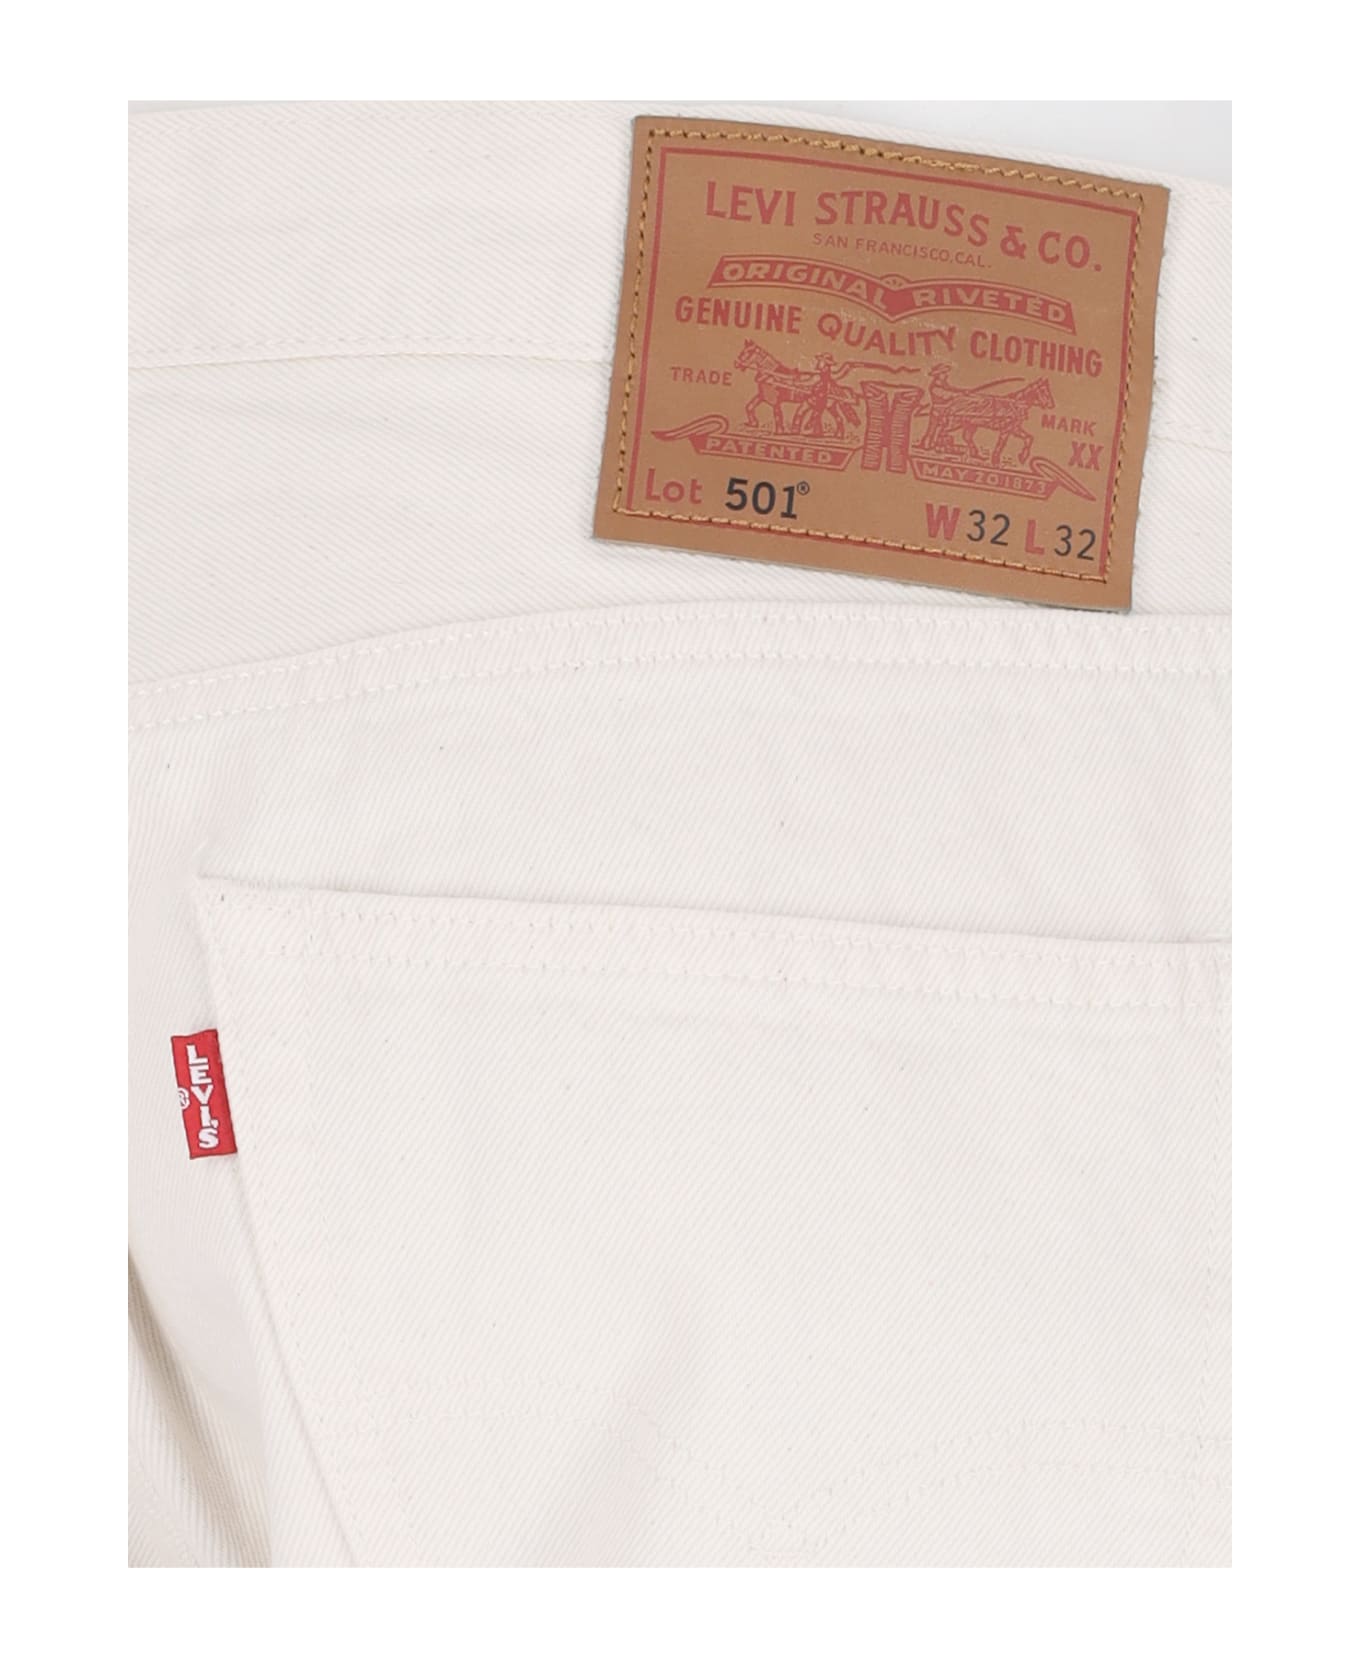 Levi's '501 My Candy' Jeans - Crema ボトムス